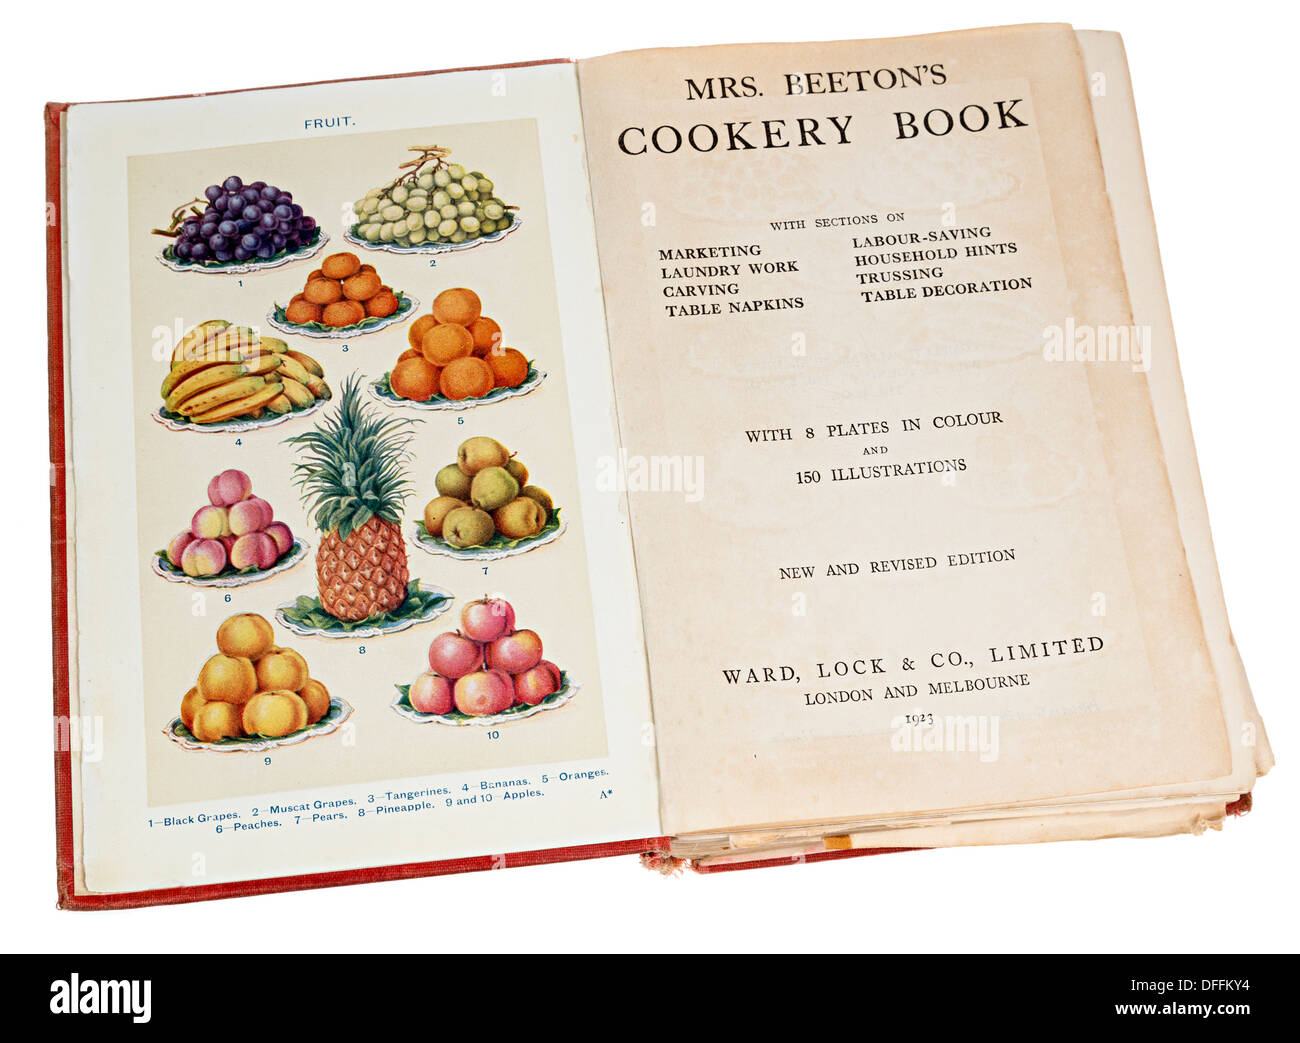 Mrs Beaton's Cookery Book of 1923 showing title page and fruit illustration Stock Photo